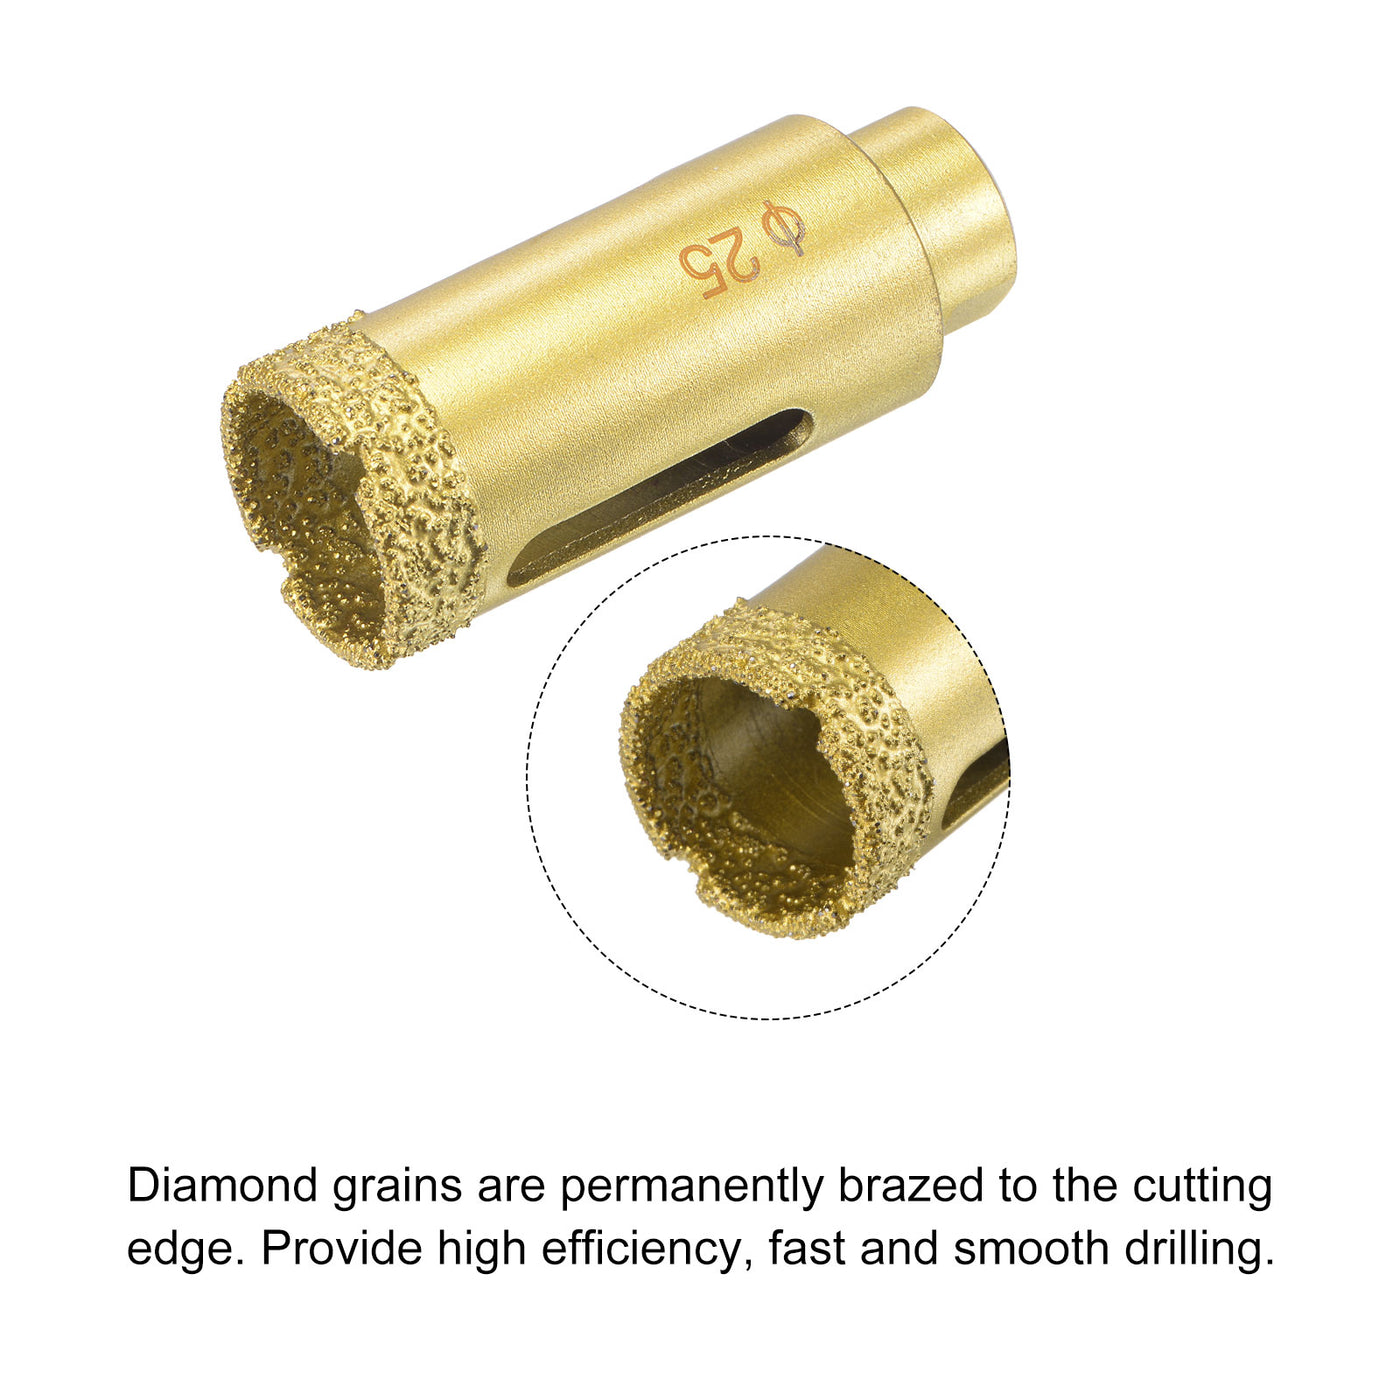 Uxcell Uxcell 25mm Brazed Diamond Core Drill Bits with M10 Arbor Adapter for Tile Marble Stone